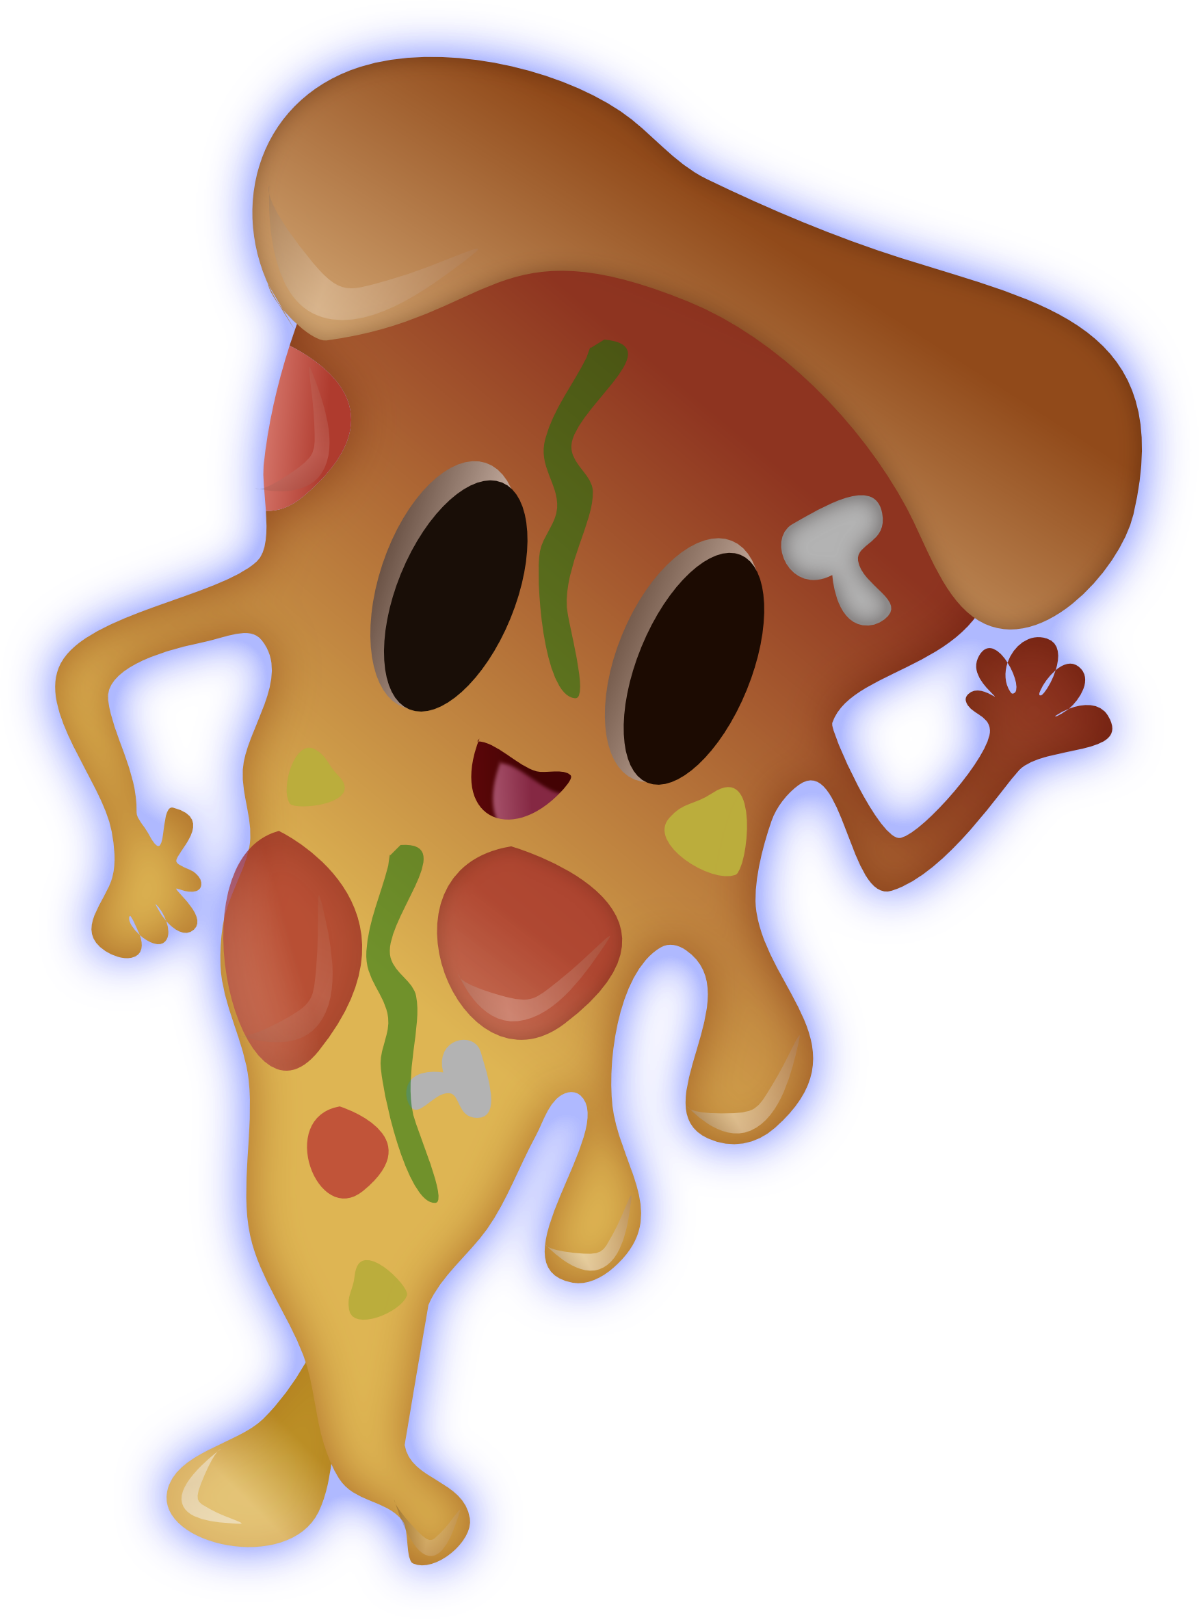 Related Dancing Pizza Clipart - Dance (1199x1619)